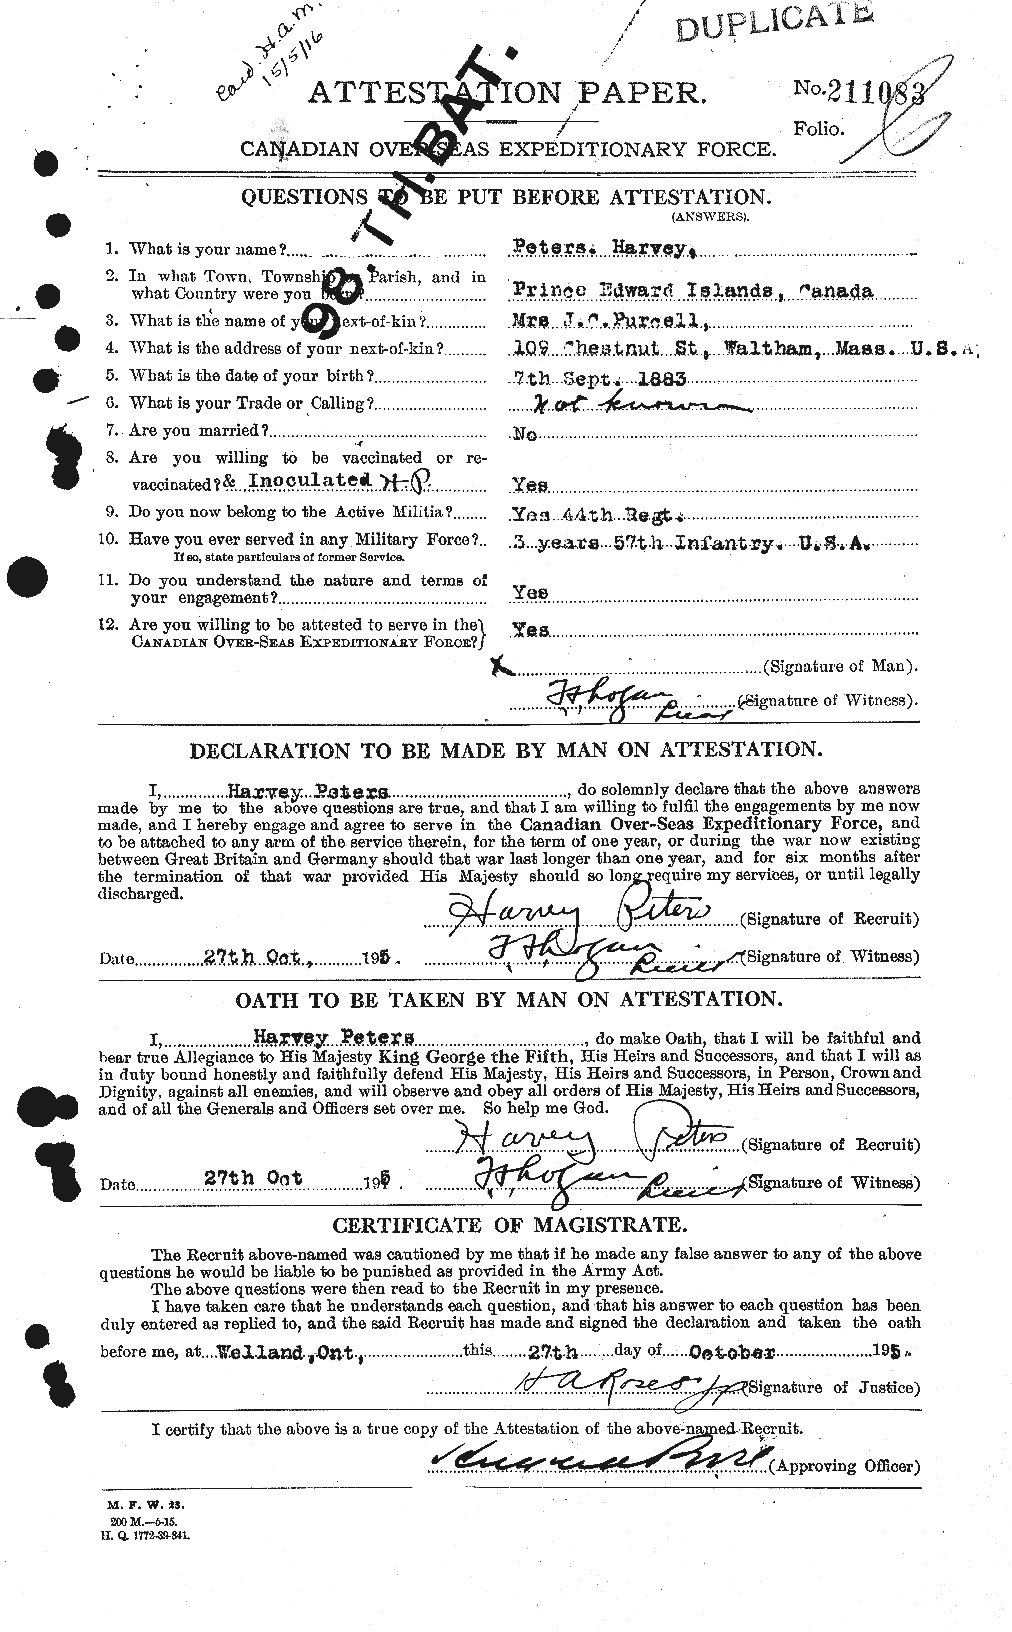 Personnel Records of the First World War - CEF 575483a